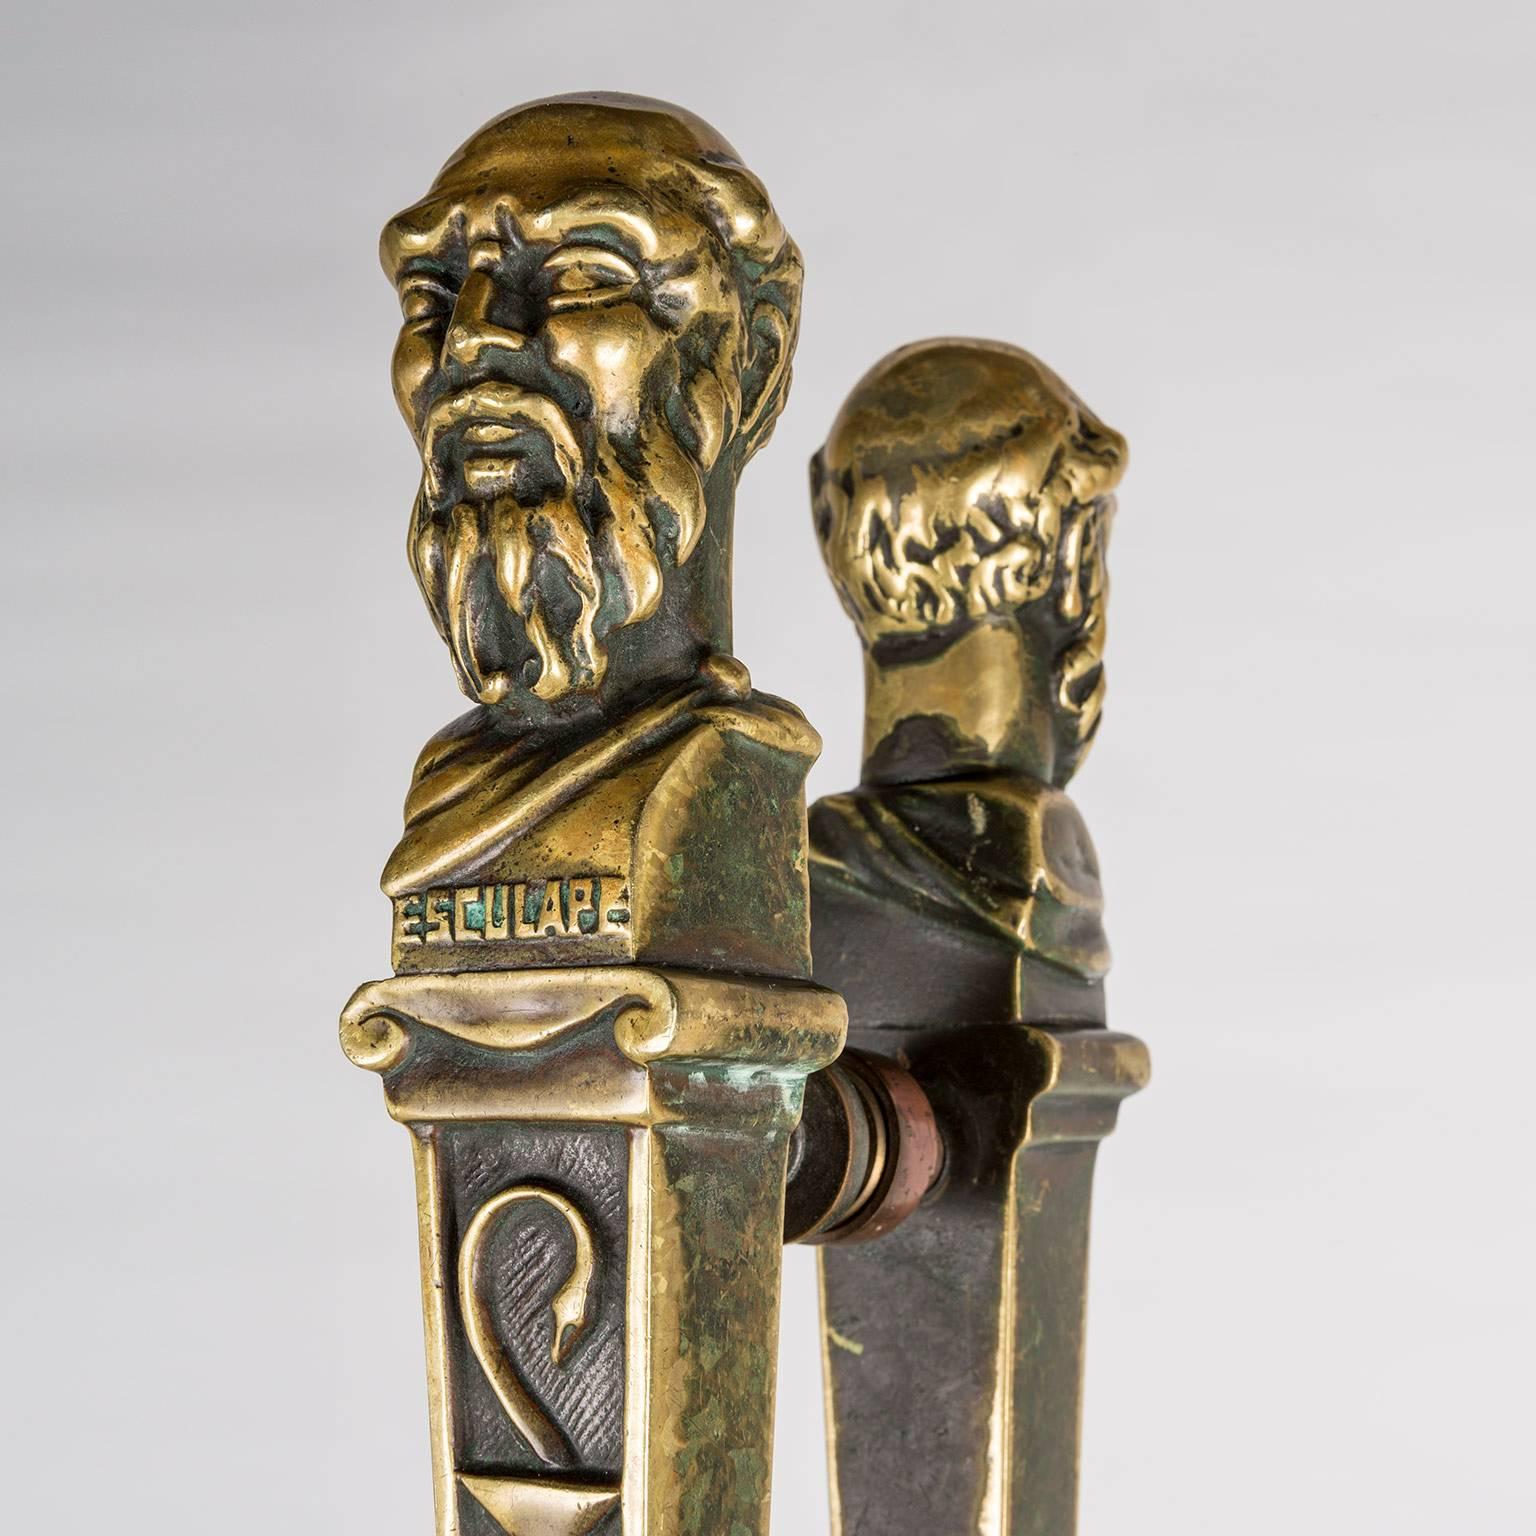 French 19th century brass pharmacy door handles inscribed Esculape (Aesclepius, the Greco-Roman god of healing) and with the insignia of a caduceus symbolizing a physician. The two pairs came from a Medical Pharmacy in Paris that was established in